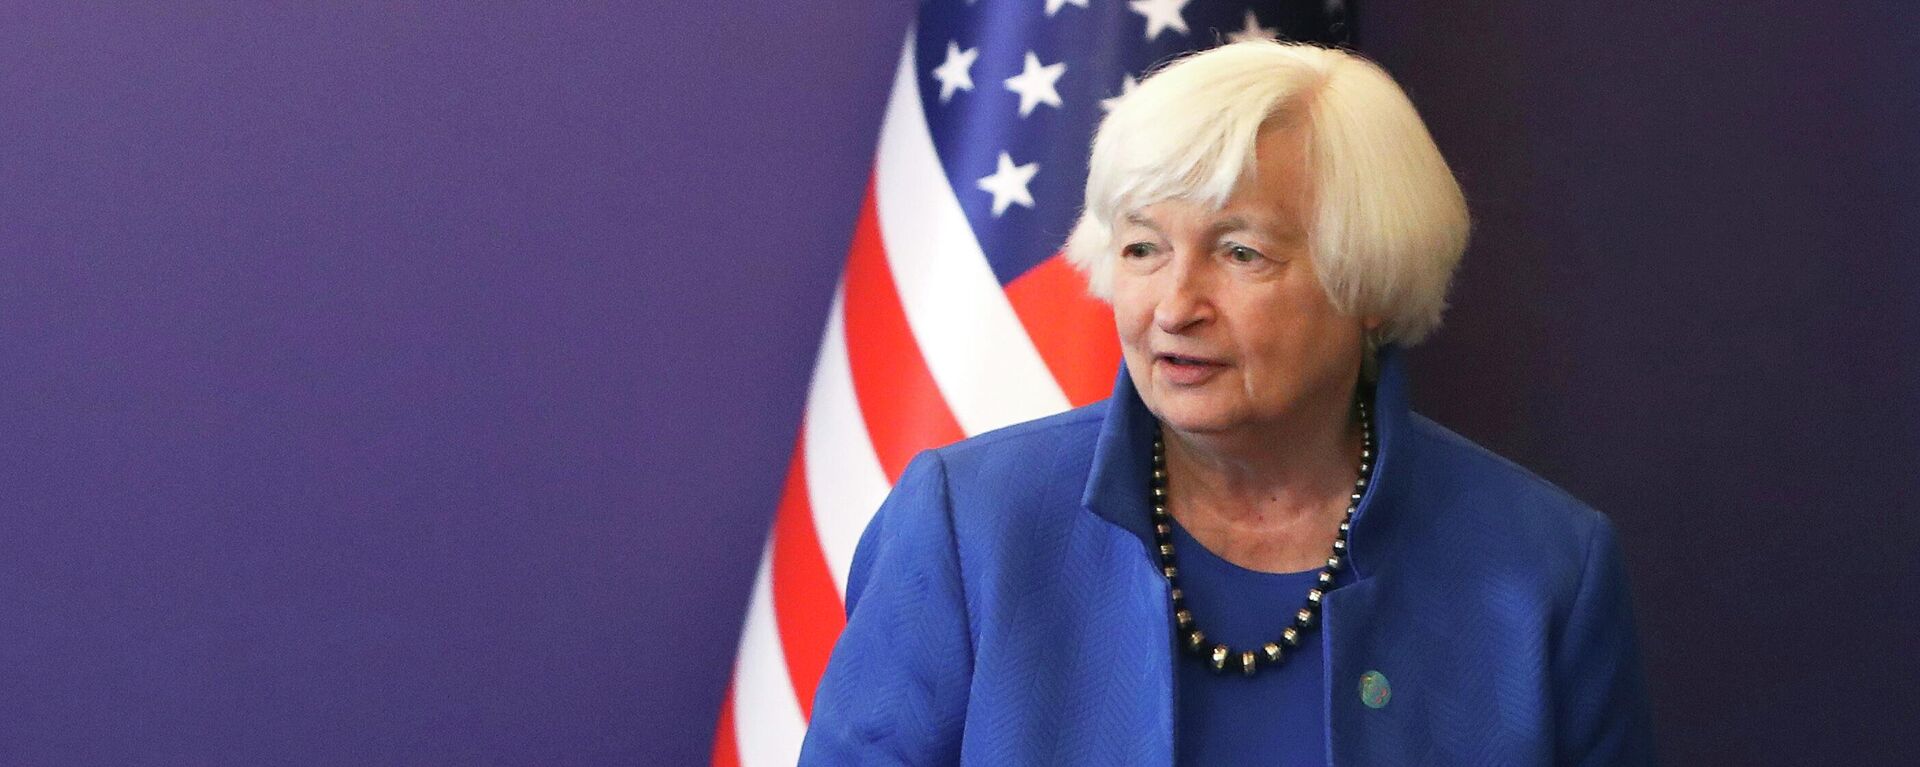 U.S. Treasury Secretary Janet Yellen attends a meeting with South Korean Deputy Prime Minister and Minister of Economy and Finance Choo Kyung-ho at Lotte Hotel in Seoul, South Korea, Tuesday, July 19, 2022 - Sputnik International, 1920, 28.09.2022